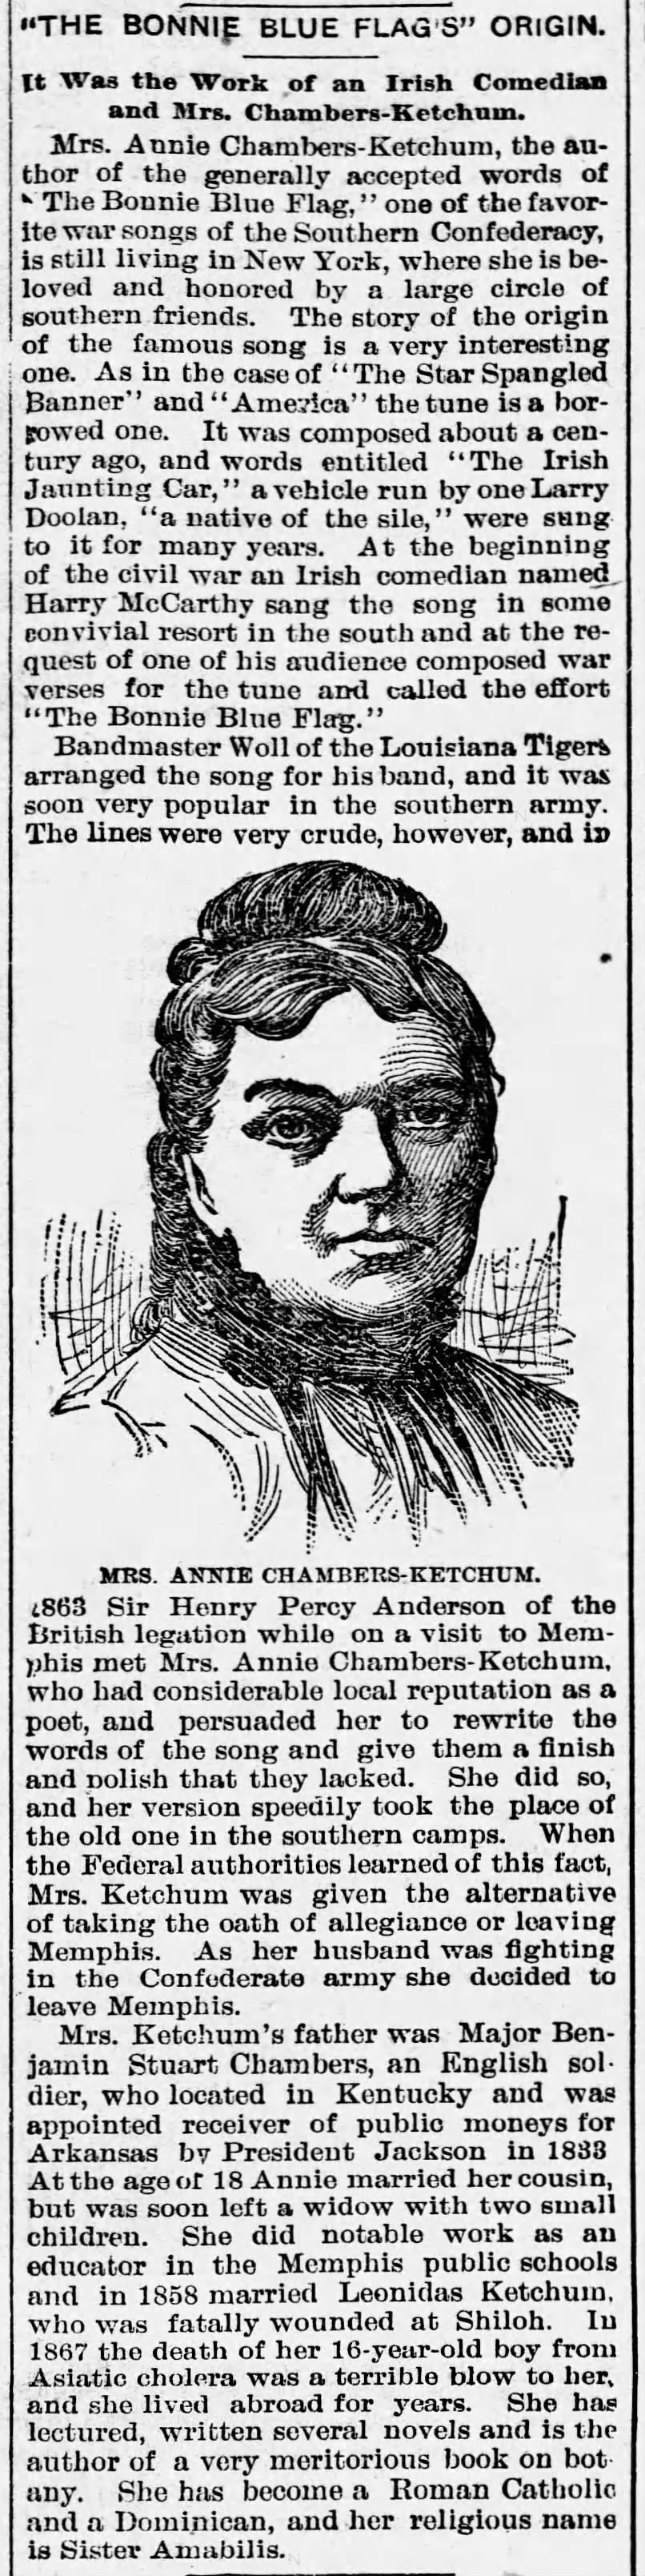 The other Annie Chambers